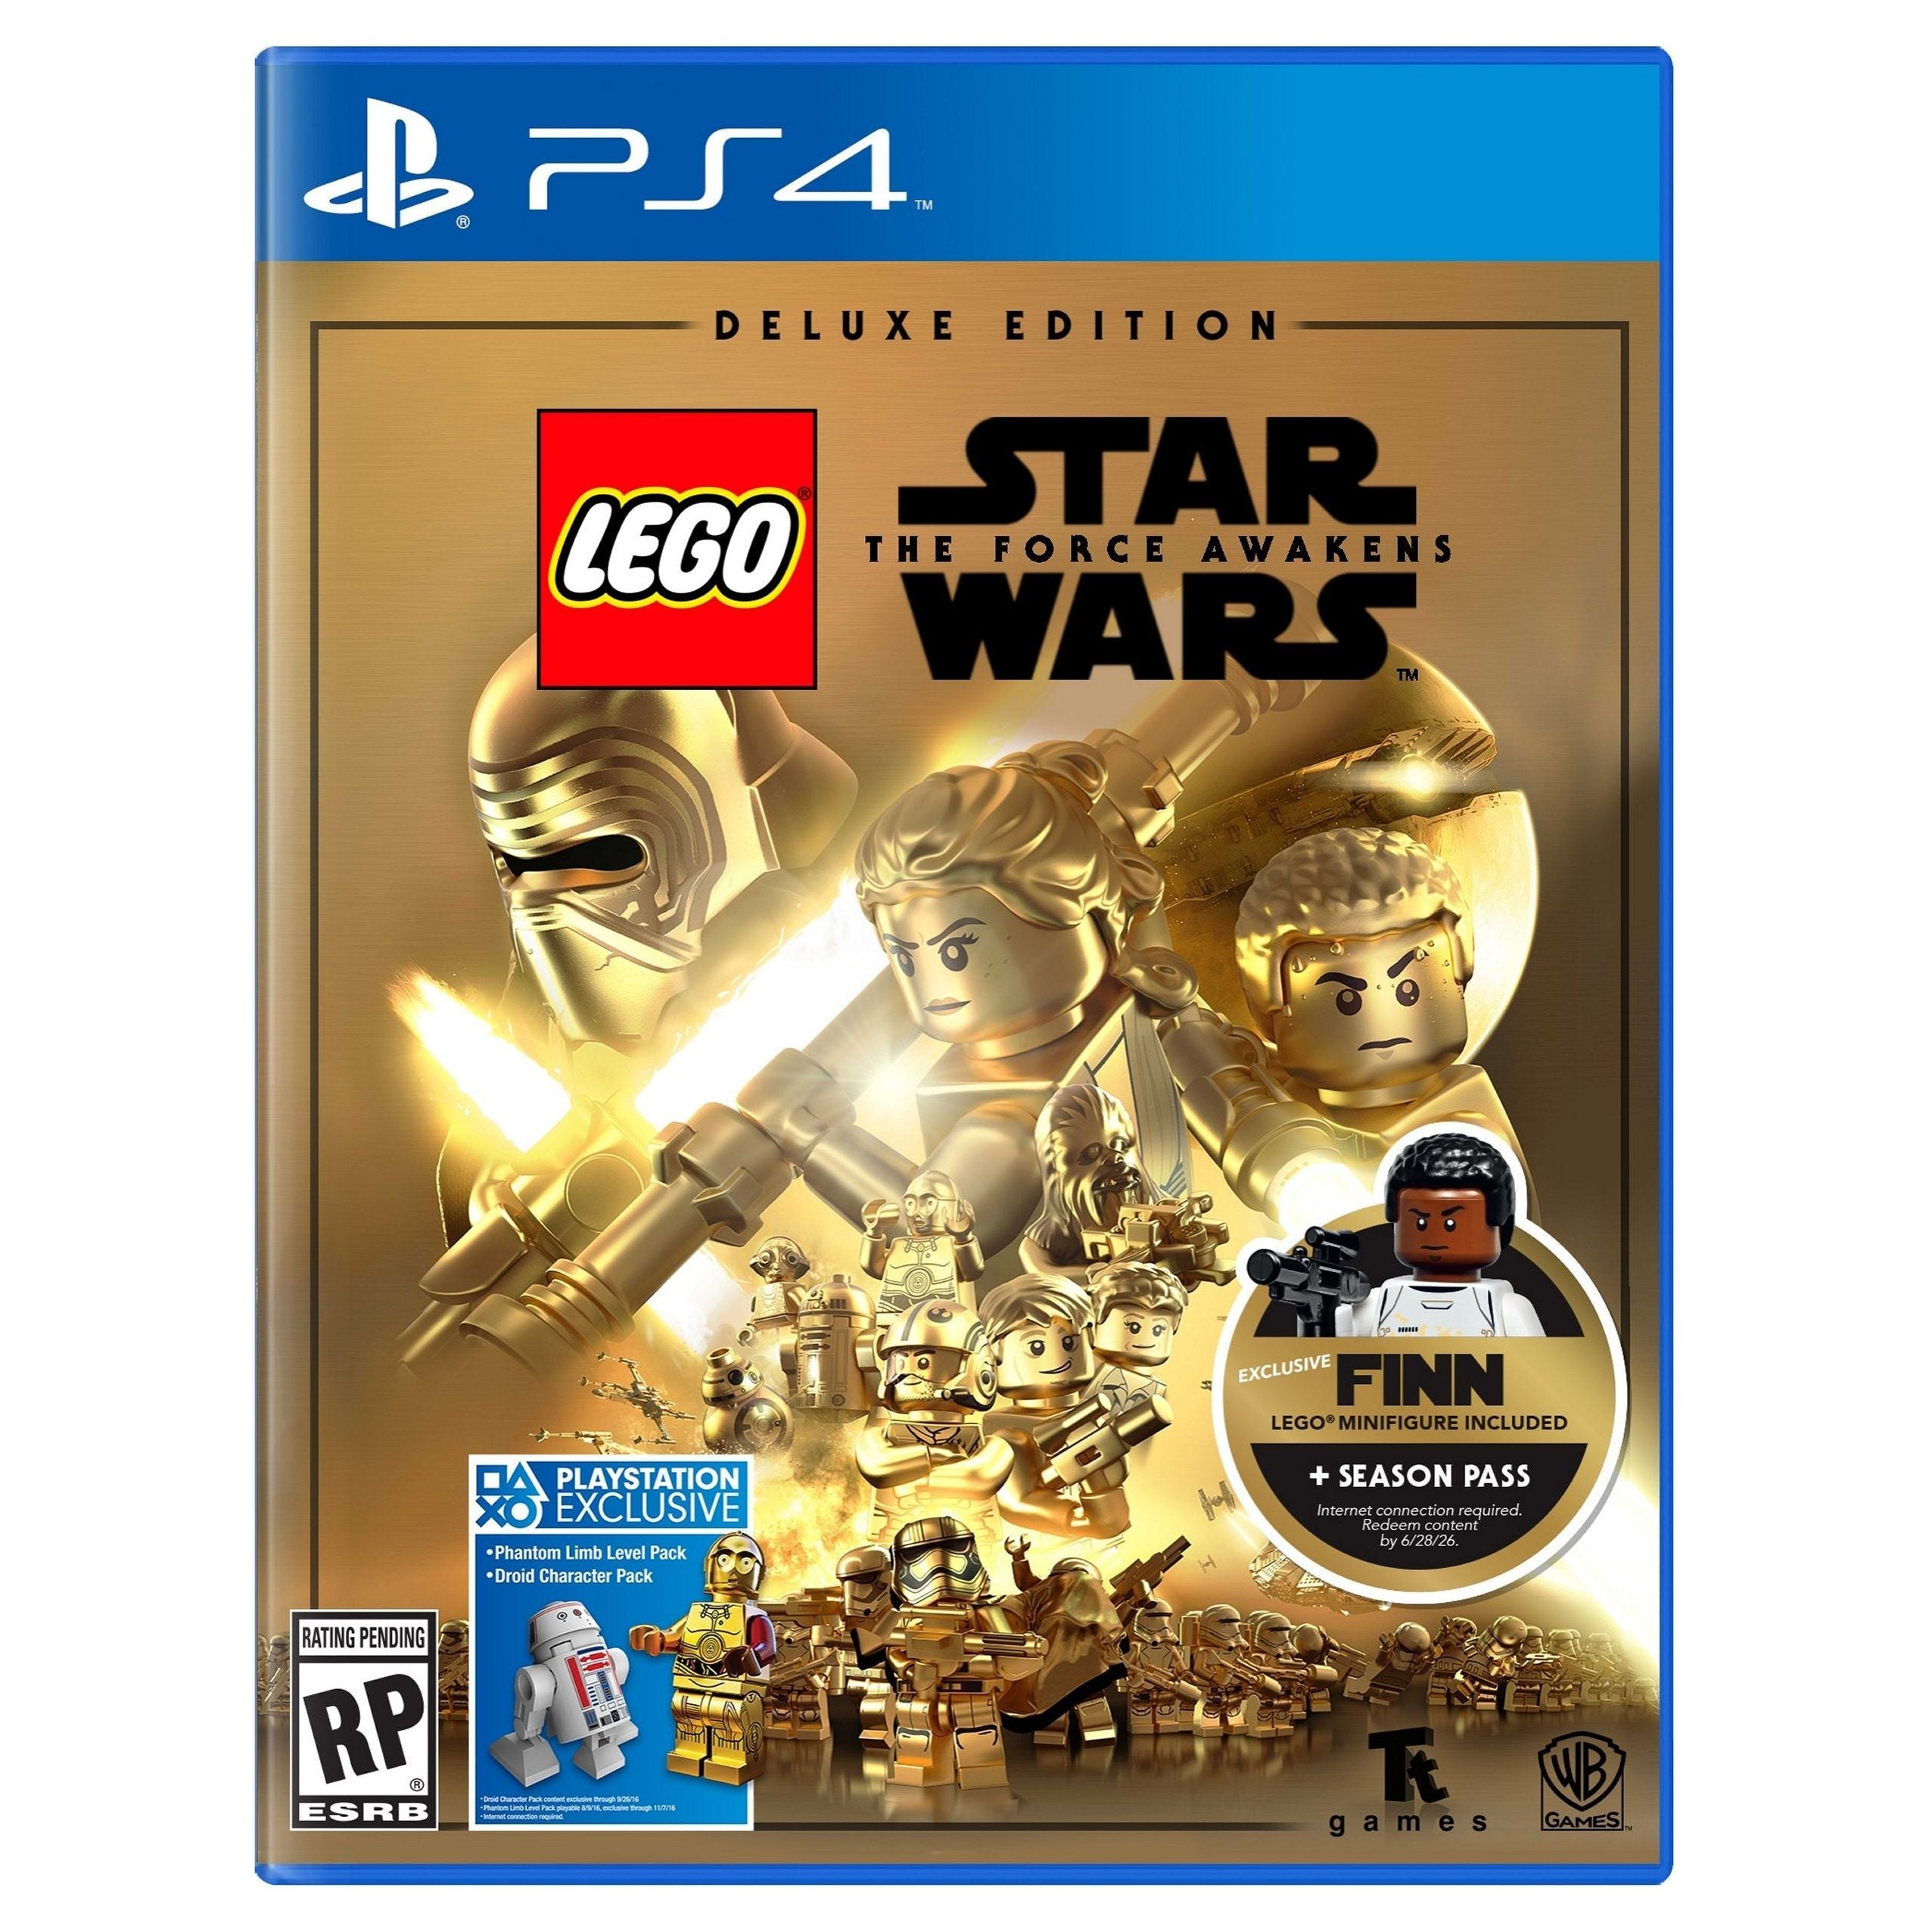 PS4 - Lego Star Wars The Force Awakens Deluxe Deluxe Edition (Sealed)